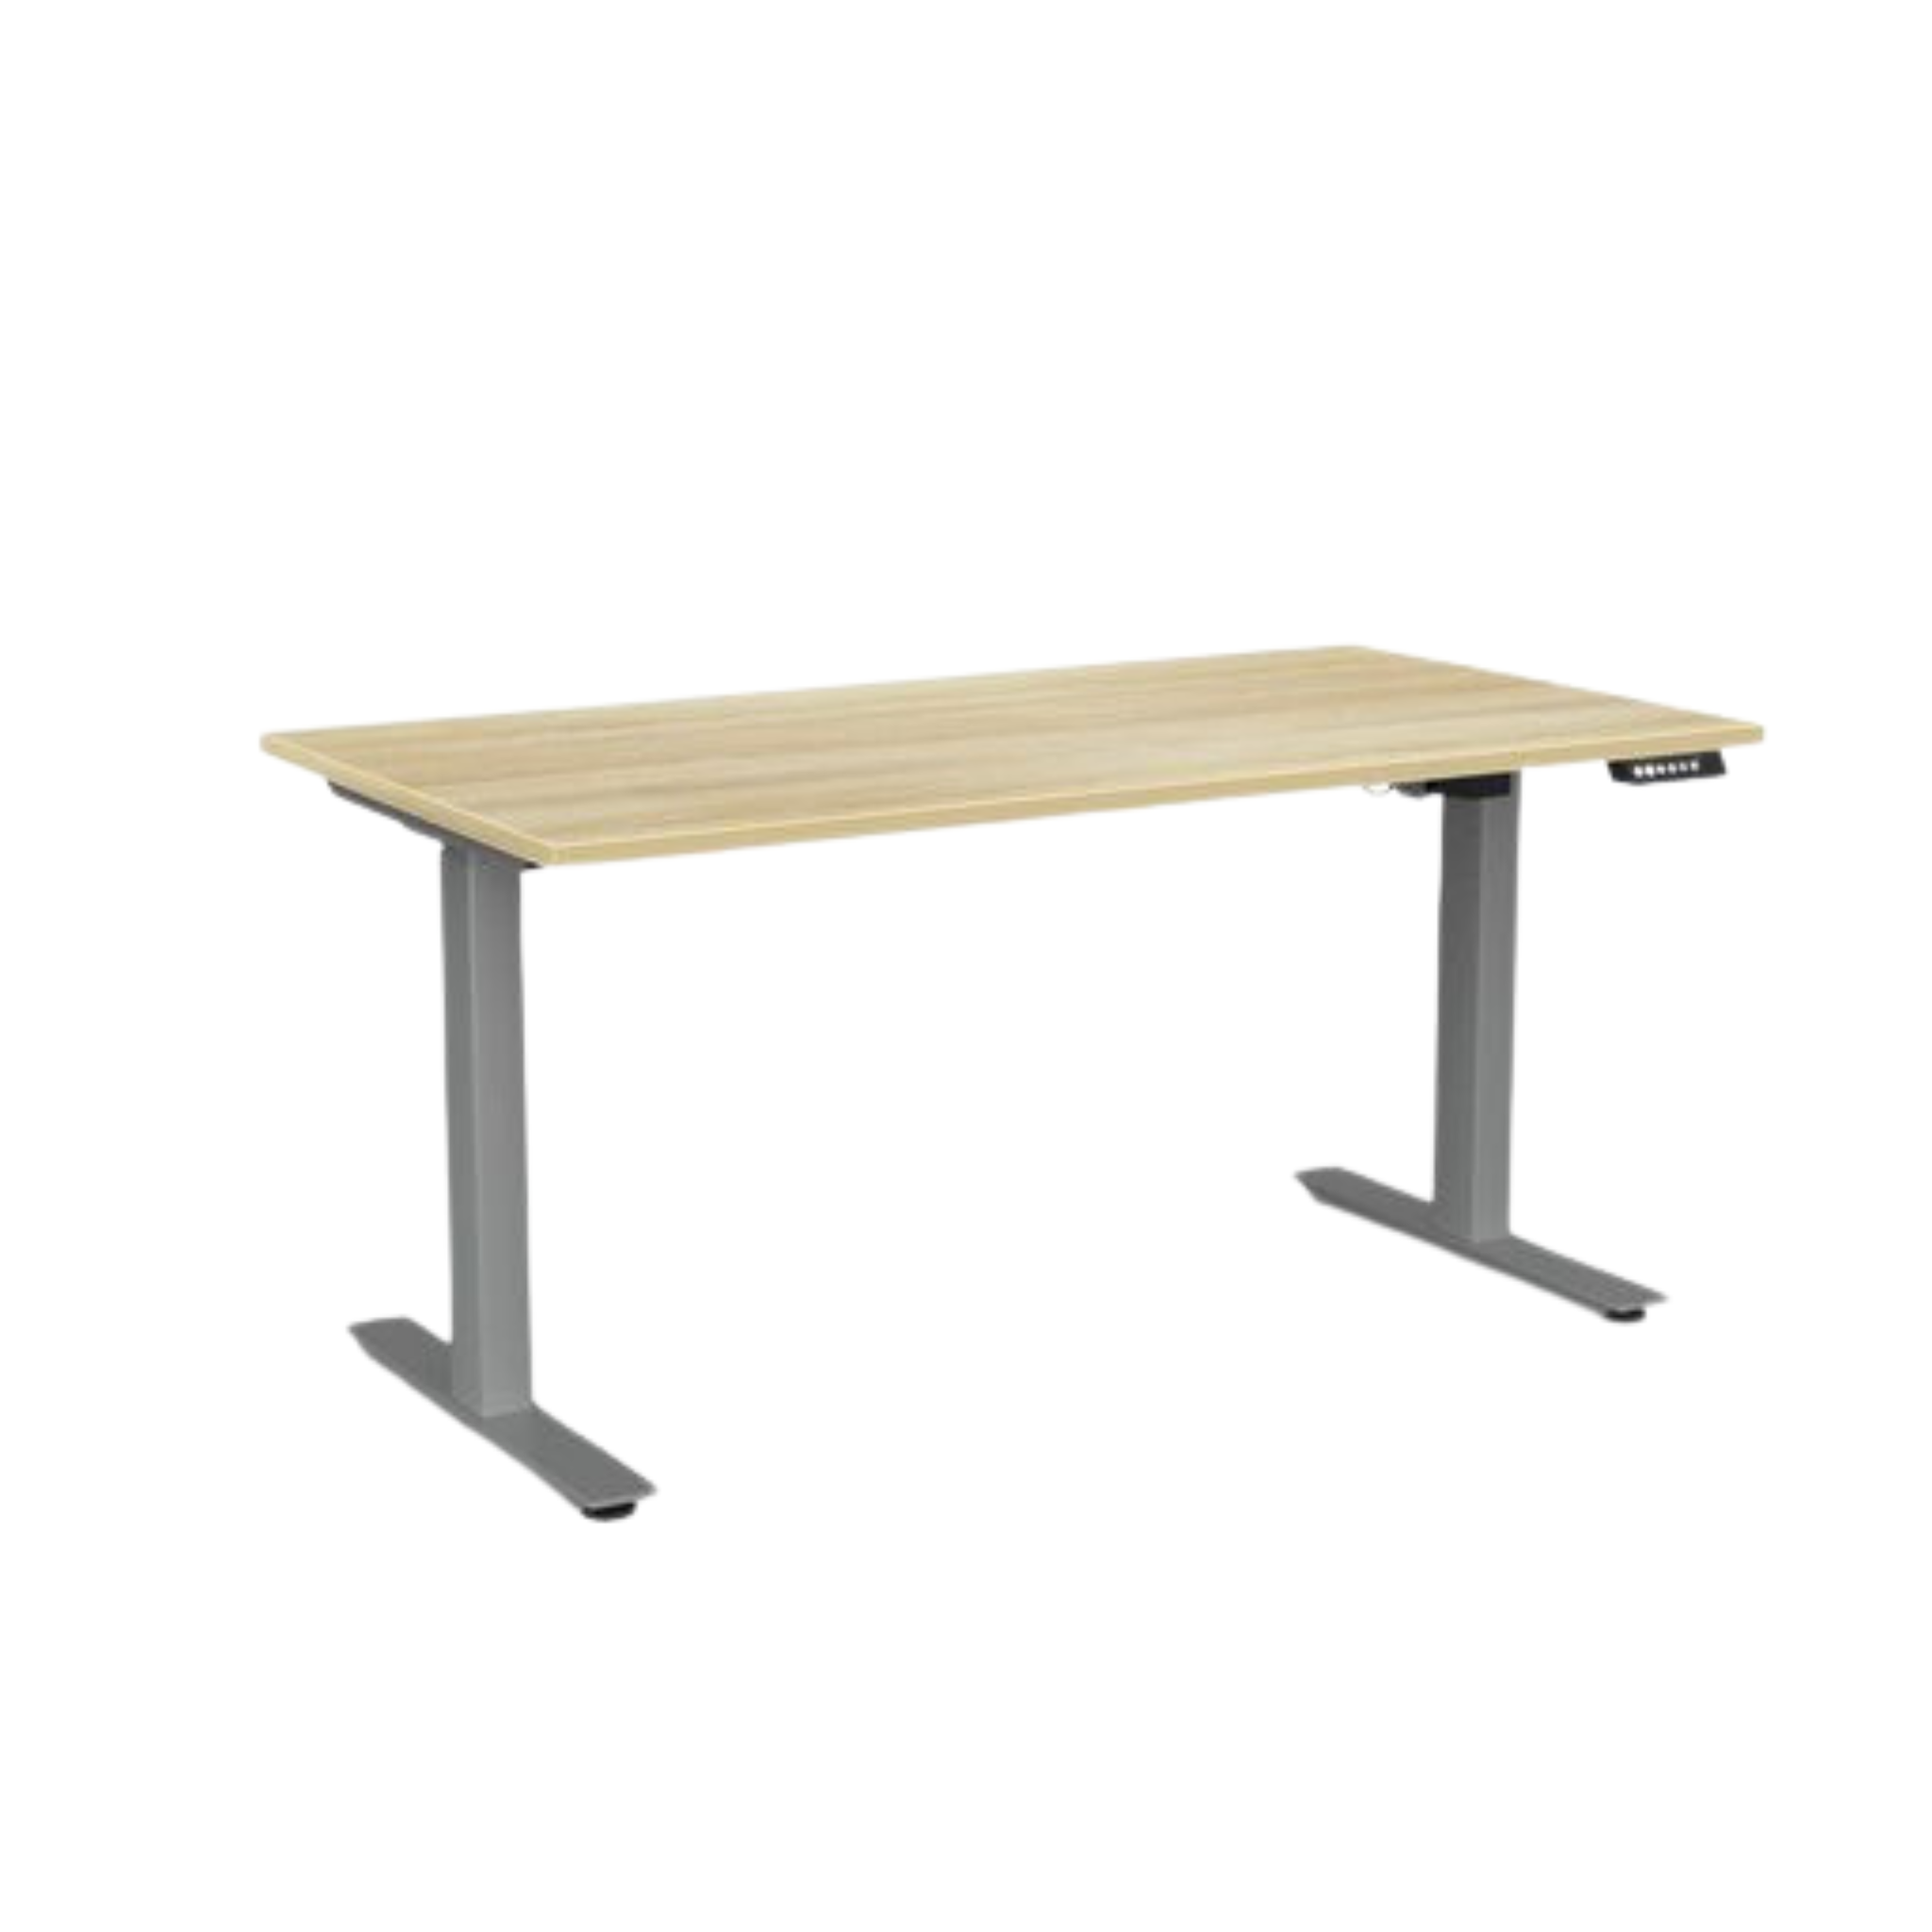 Agile 2 electric sit to stand desk with silver frame and atlantic oak top